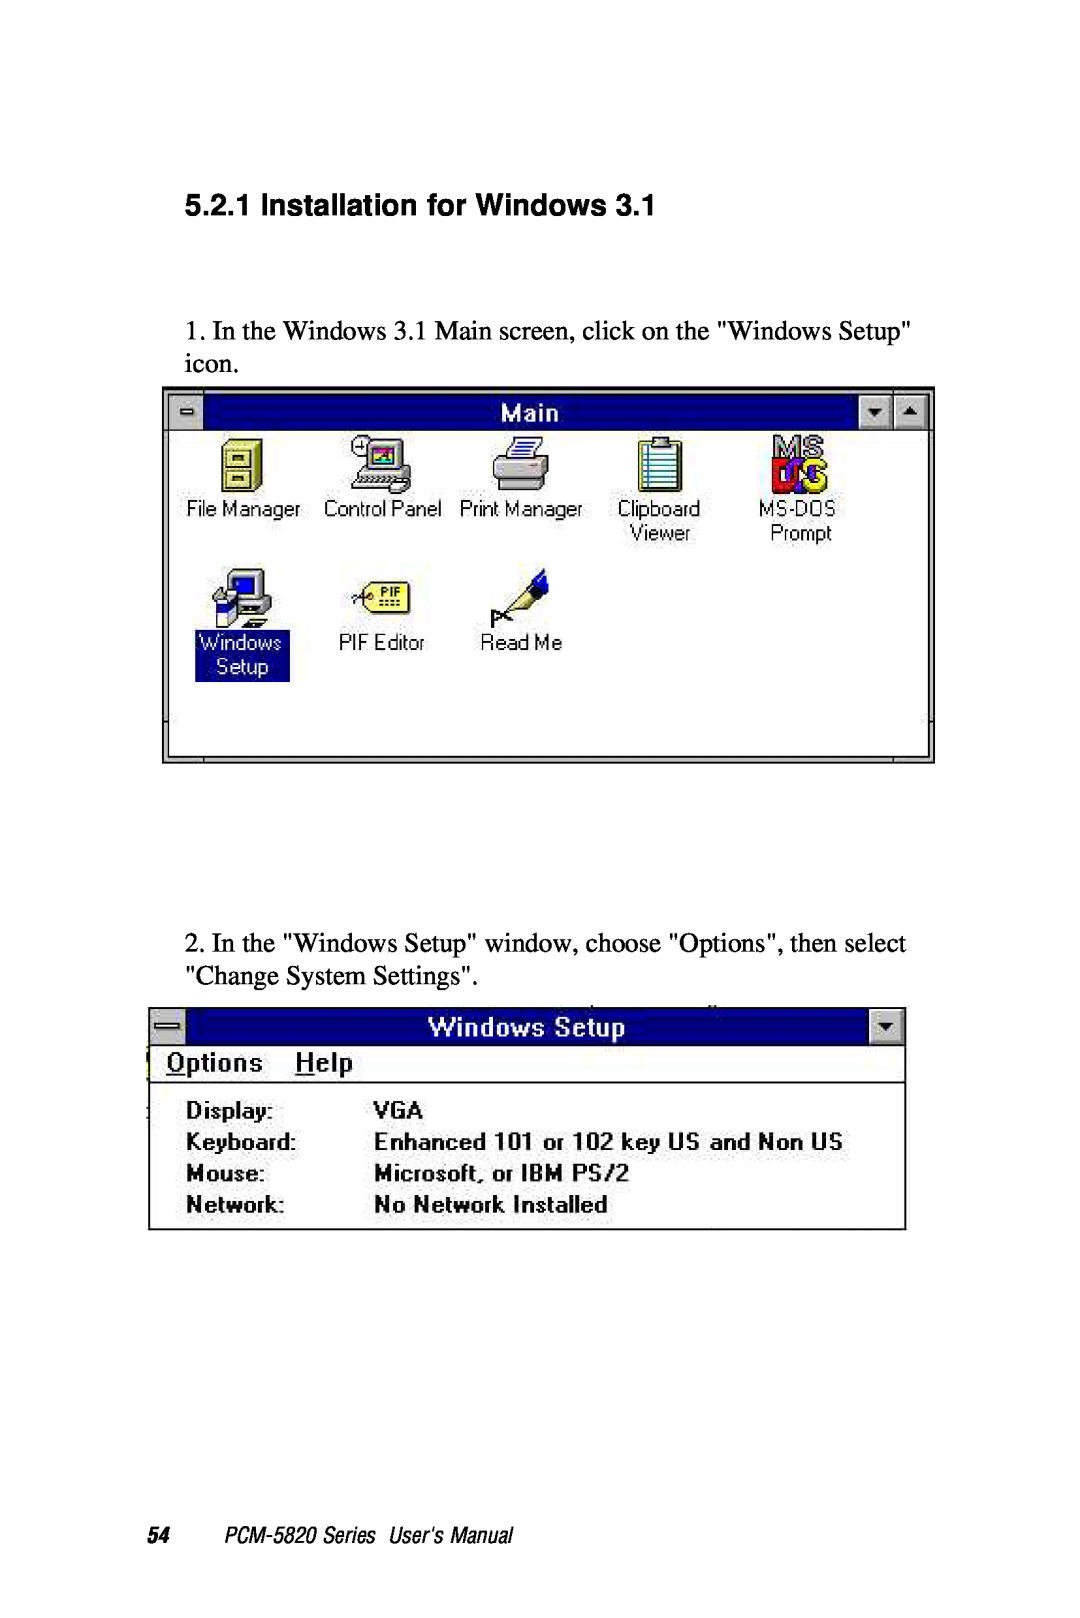 AMD PCM-5820 manual Installation for Windows, In the Windows 3.1 Main screen, click on the Windows Setup icon 